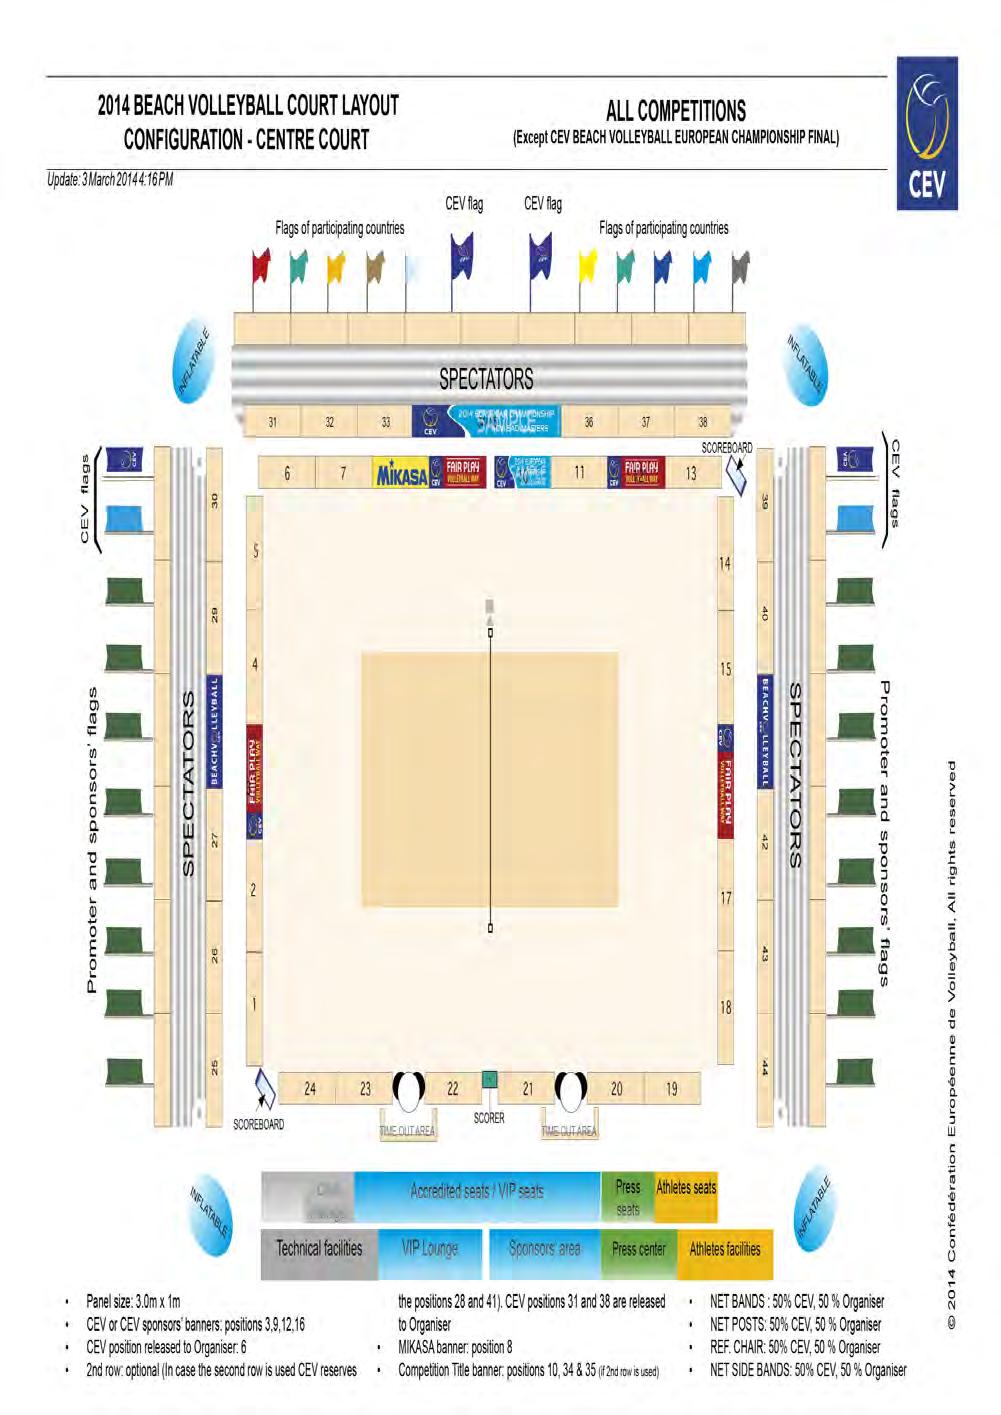 ANNEX 5 - Official court layouts The centre court and all side courts have to respect valid competition regulations in all technical, organisation and commercial aspects.